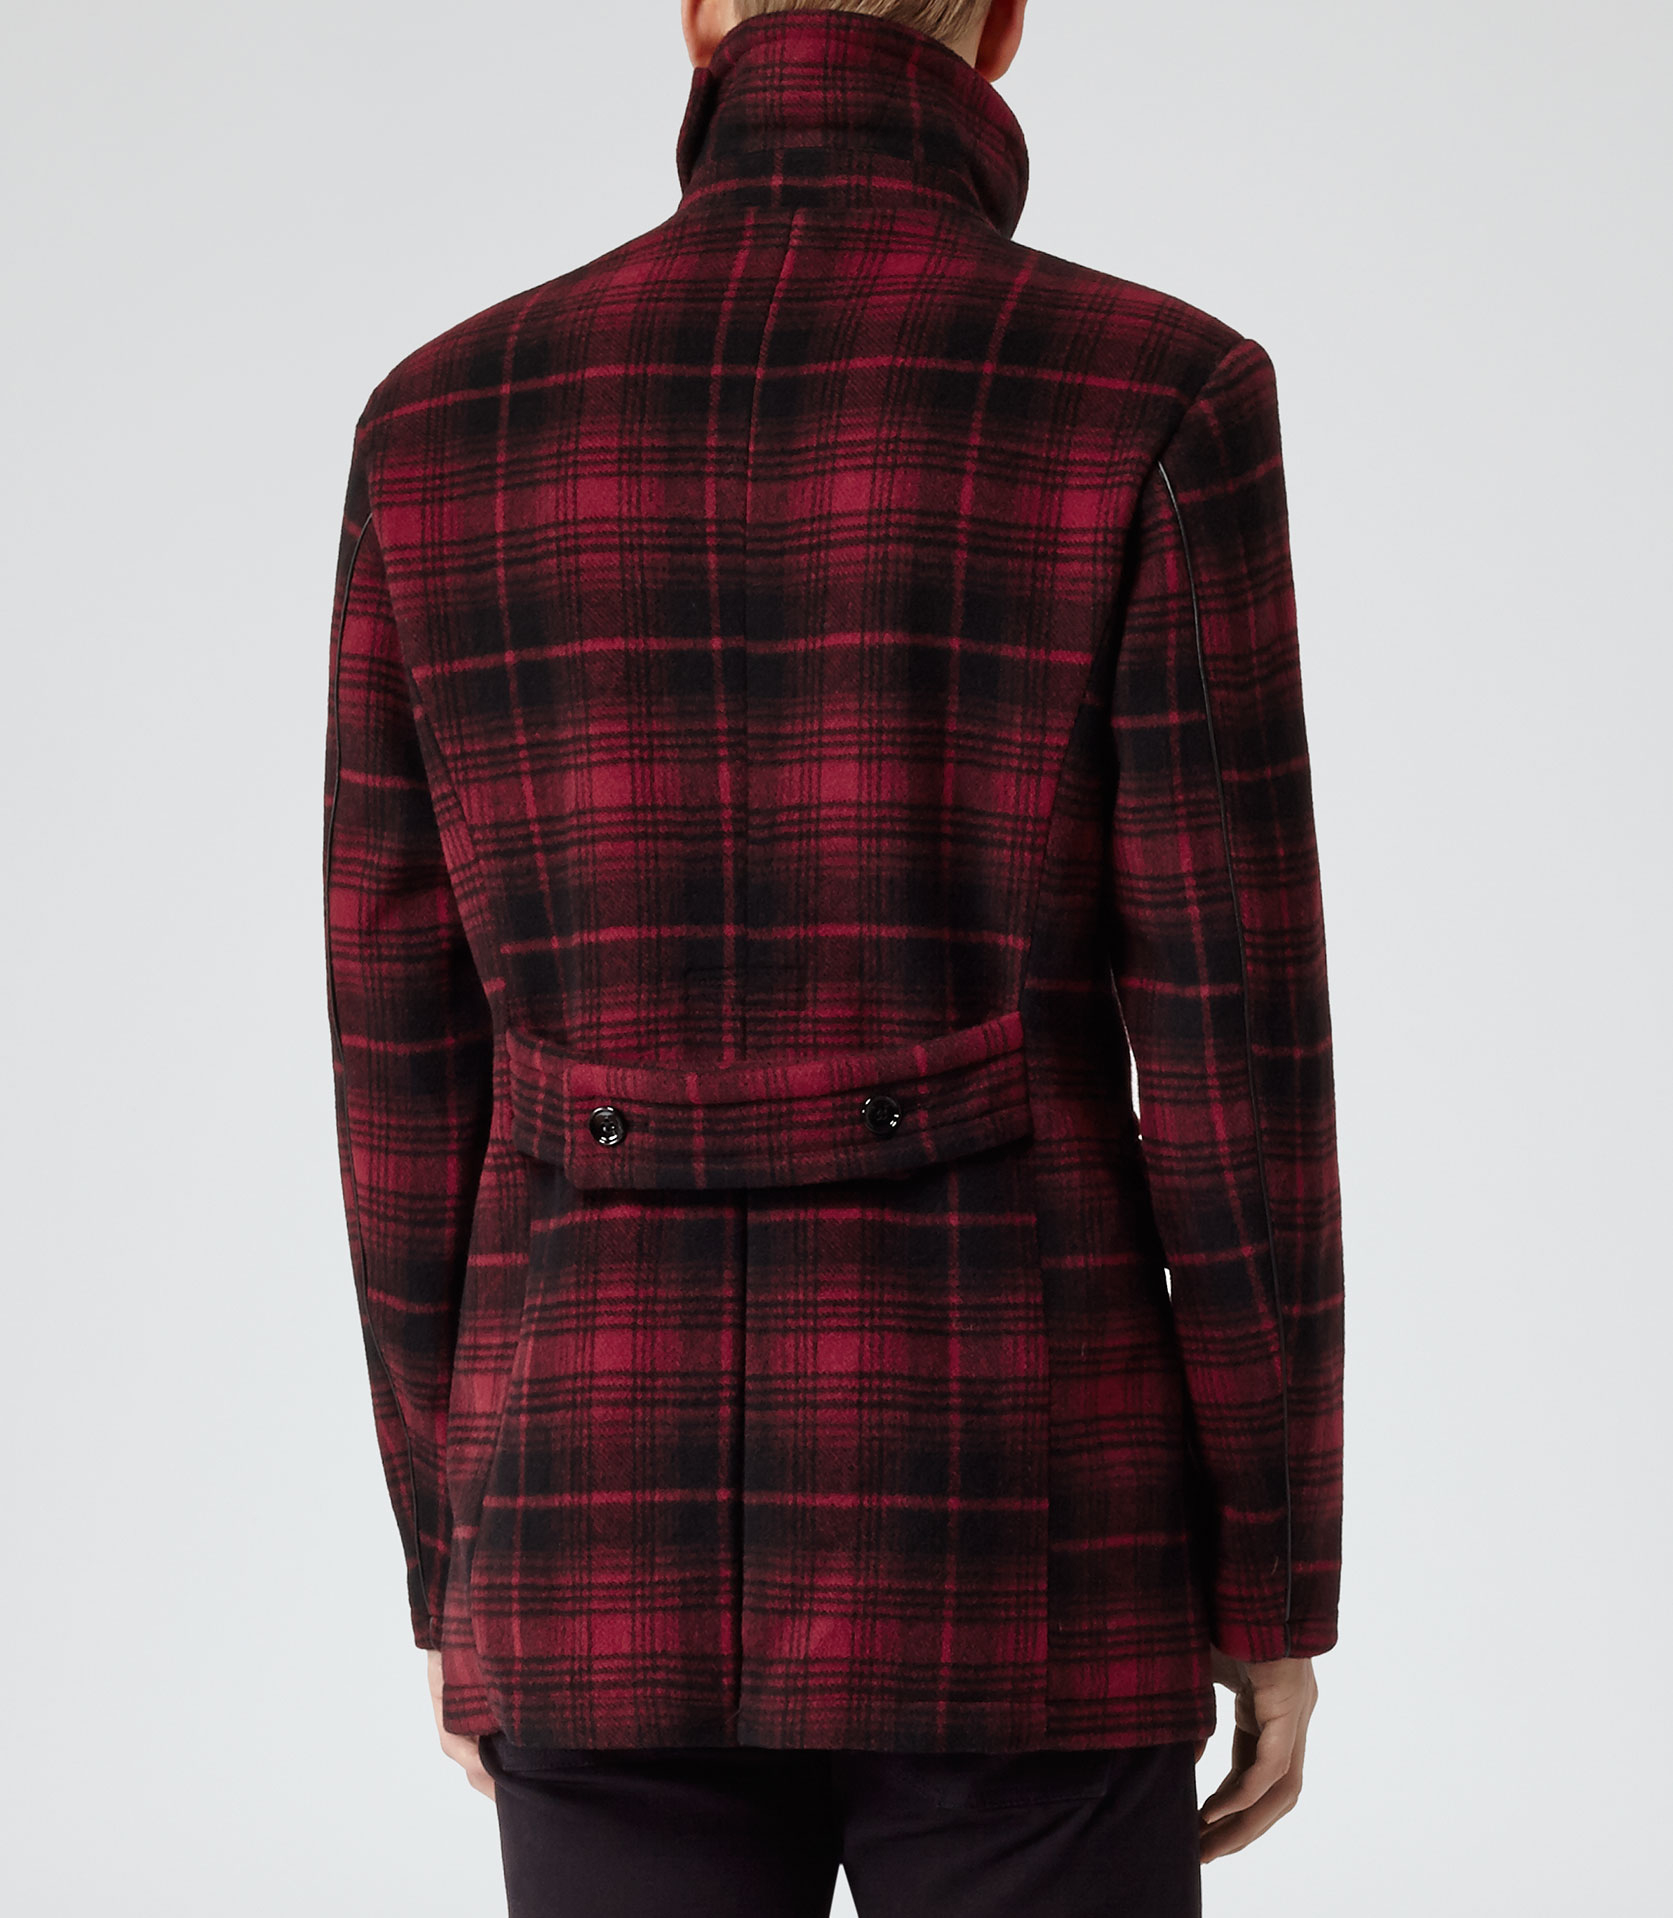 Lyst - Reiss Redwood Check Pea Coat in Red for Men